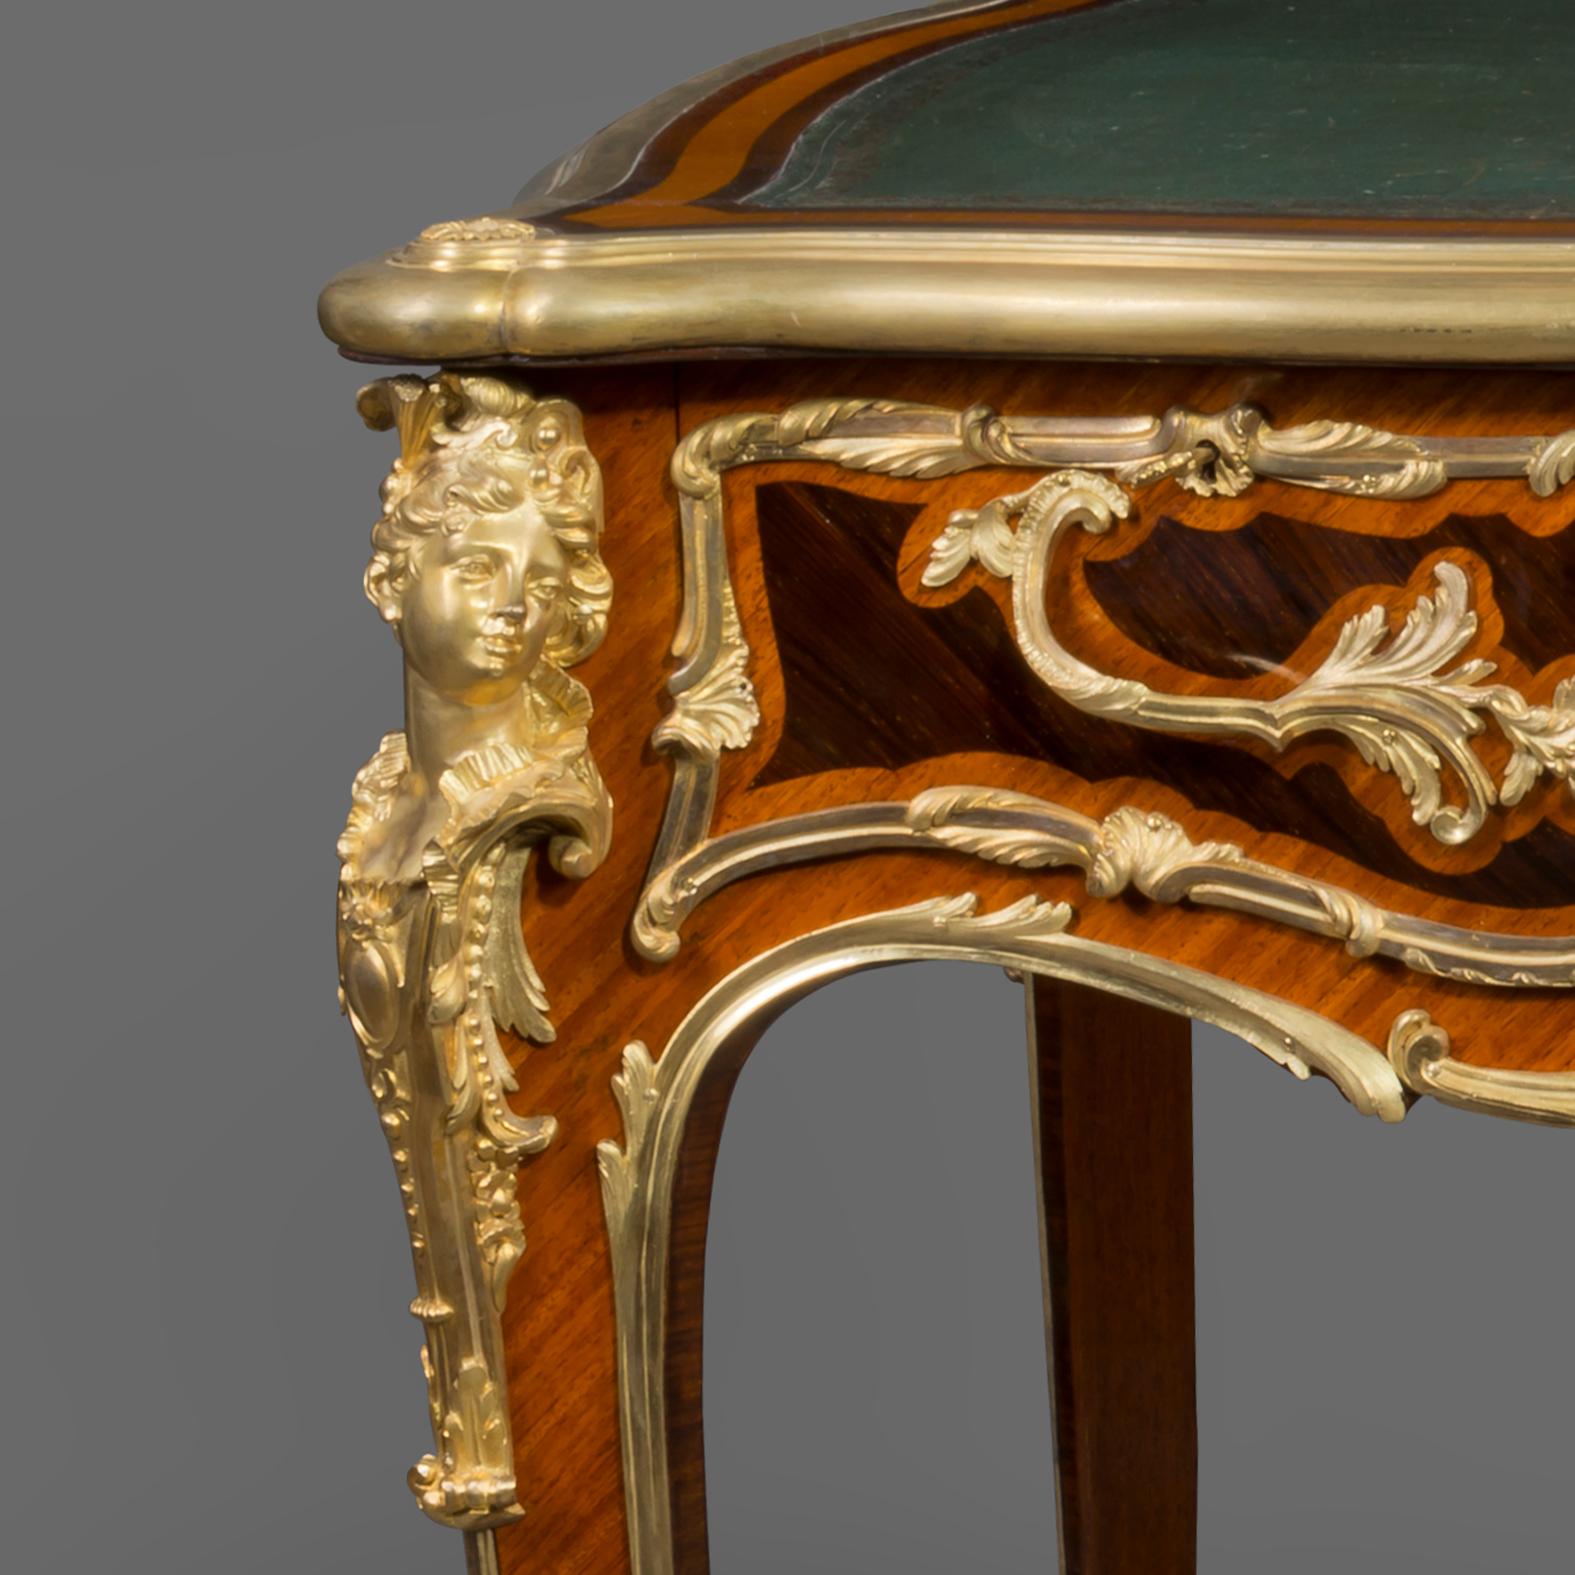 Regence Style Gilt Bronze-Mounted Bureau Plat by Zwiener, circa 1890 In Good Condition For Sale In Brighton, West Sussex